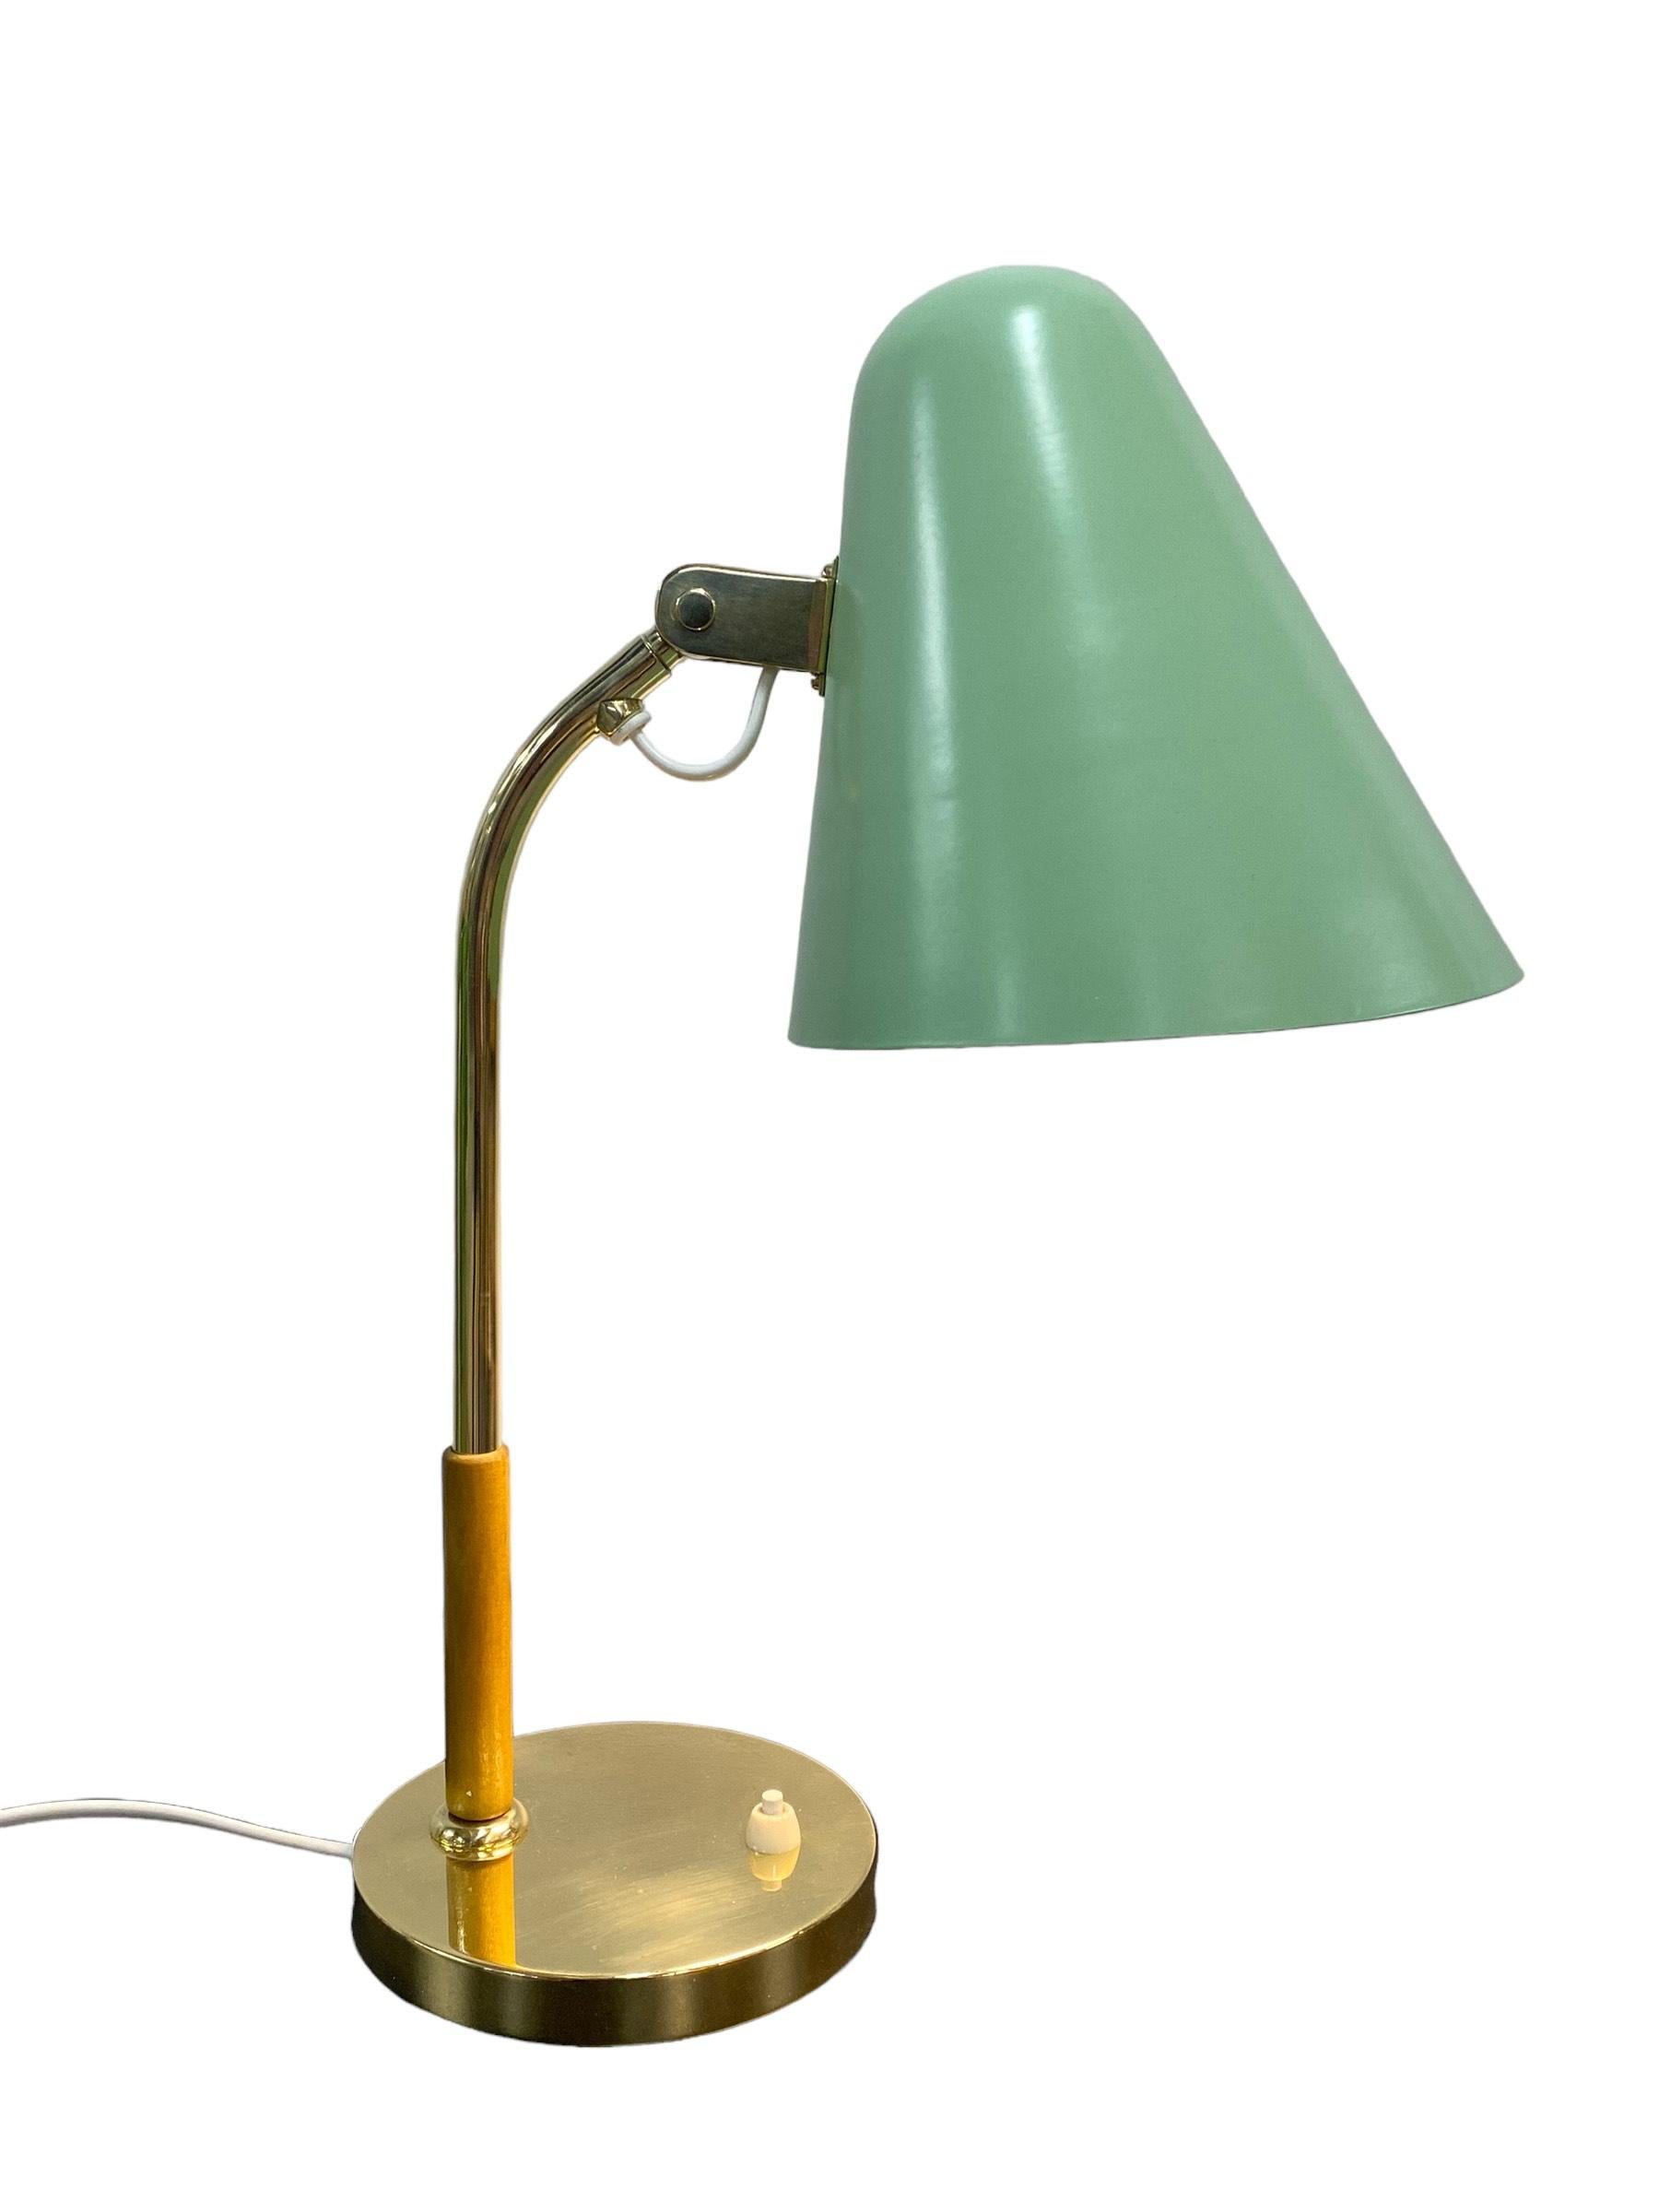 Beautiful Paavo Tynell table lamp model 5233 in mint green, manufactured by Taito Oy in Finland in the 1950s. A classic Tynell lamp with a new vibrant look and excellent condition. The item is marked Taito Oy, 5233. 

Paavo Tynell (1890–1973) was a